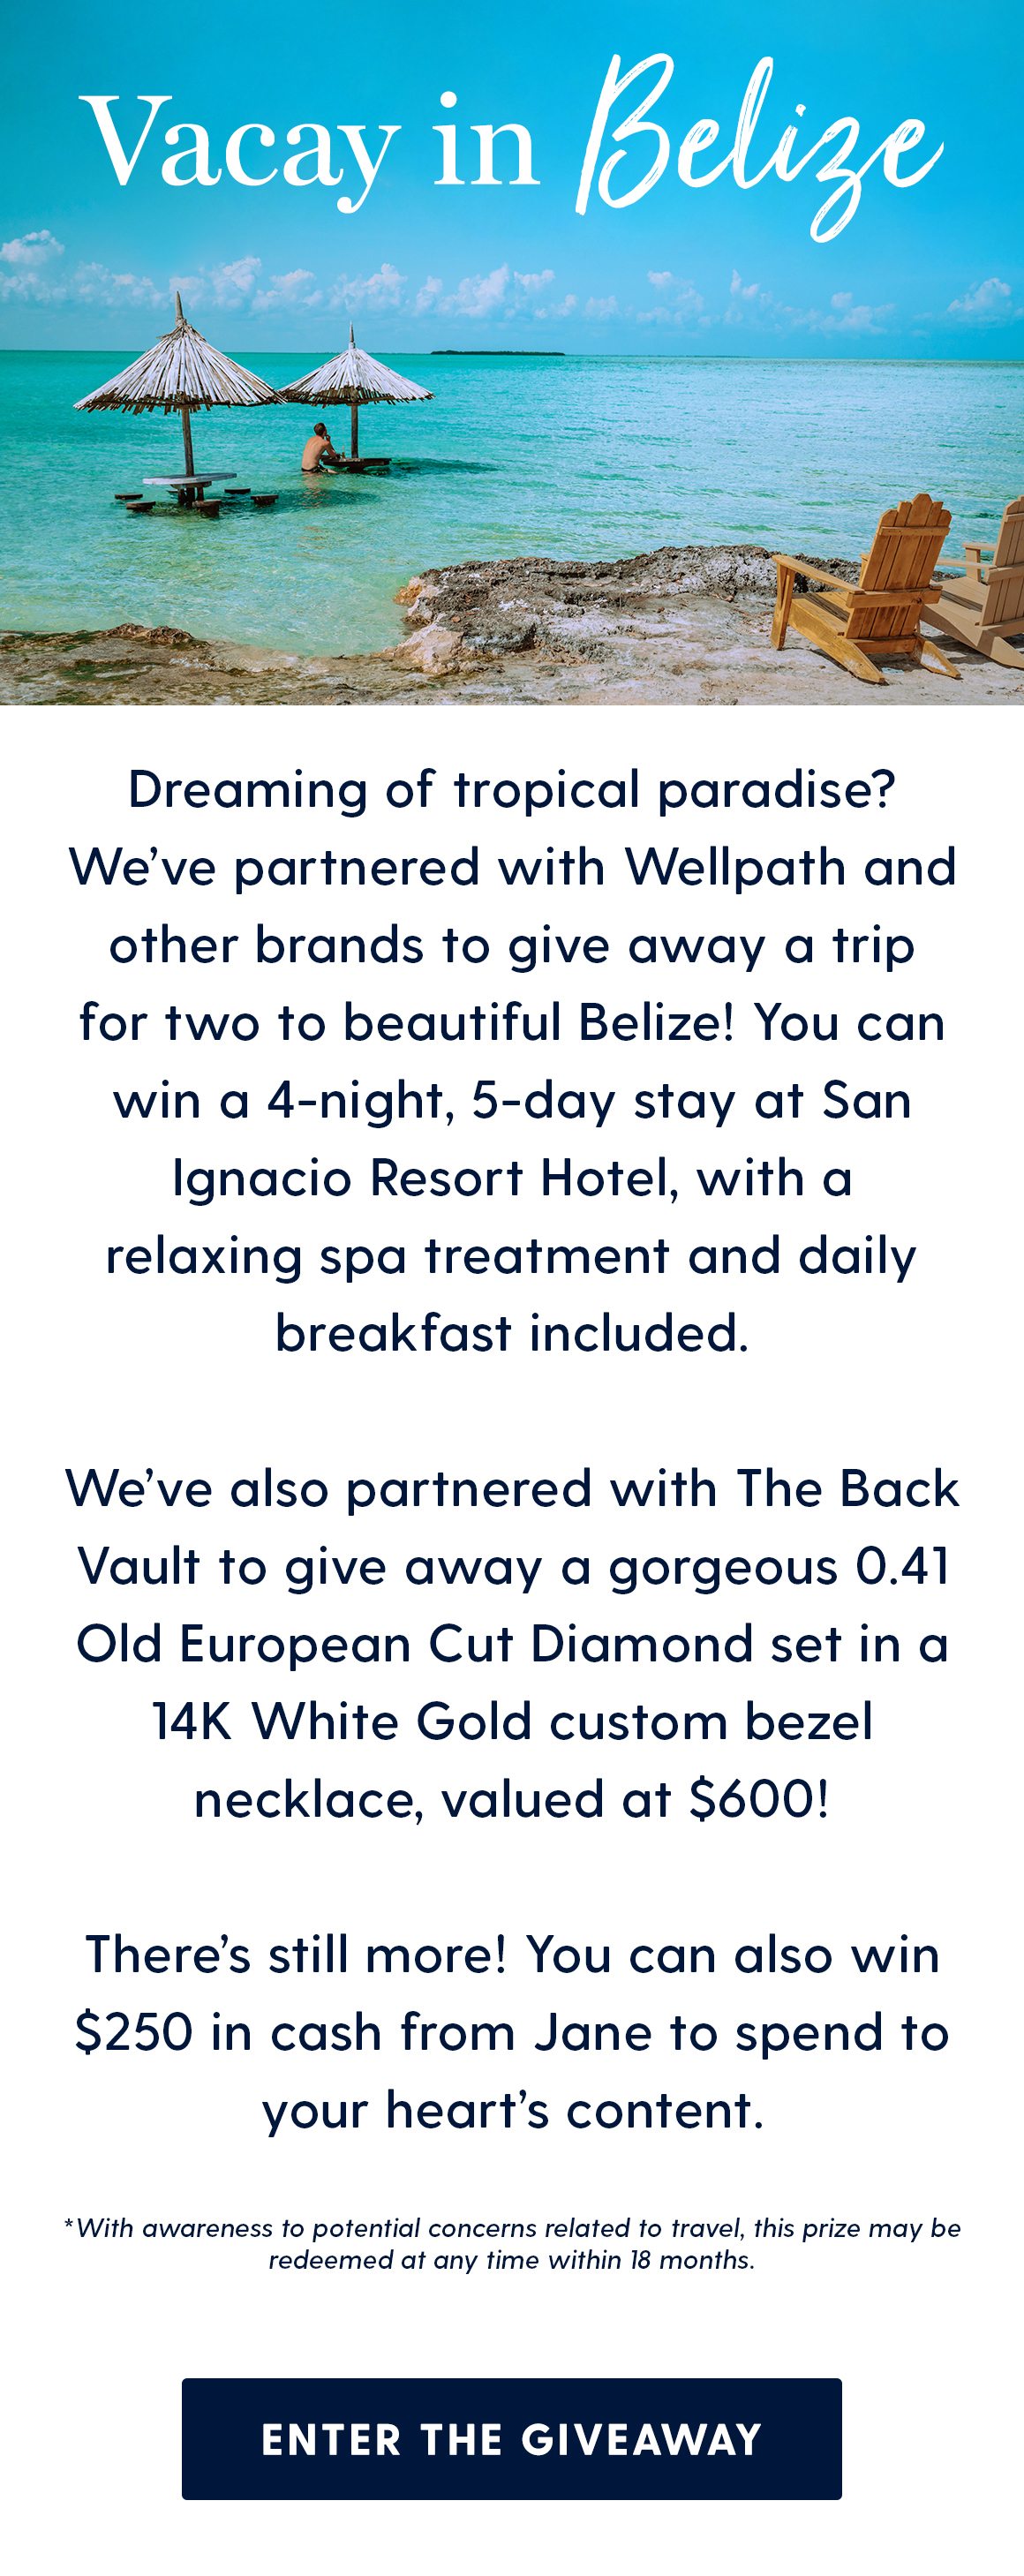 Vacay in Belize. Dreaming of tropical paradise? We’ve partnered with Wellpath and other brands to give away a trip for two to beautiful Belize! You can win a 4-night, 5-day stay at San Ignacio Resort Hotel, with a relaxing spa treatment and daily breakfast included. We’ve also partnered with The Back Vault to give away a gorgeous 0.41 Old European Cut Diamond set in a 14K White Gold custom bezel necklace, valued at $600! There’s still more! You can also win $250 in cash from Jane to spend to your heart’s content. *With awareness to potential concerns related to travel, this prize may be redeemed at any time within 18 months.Enter the Giveaway 